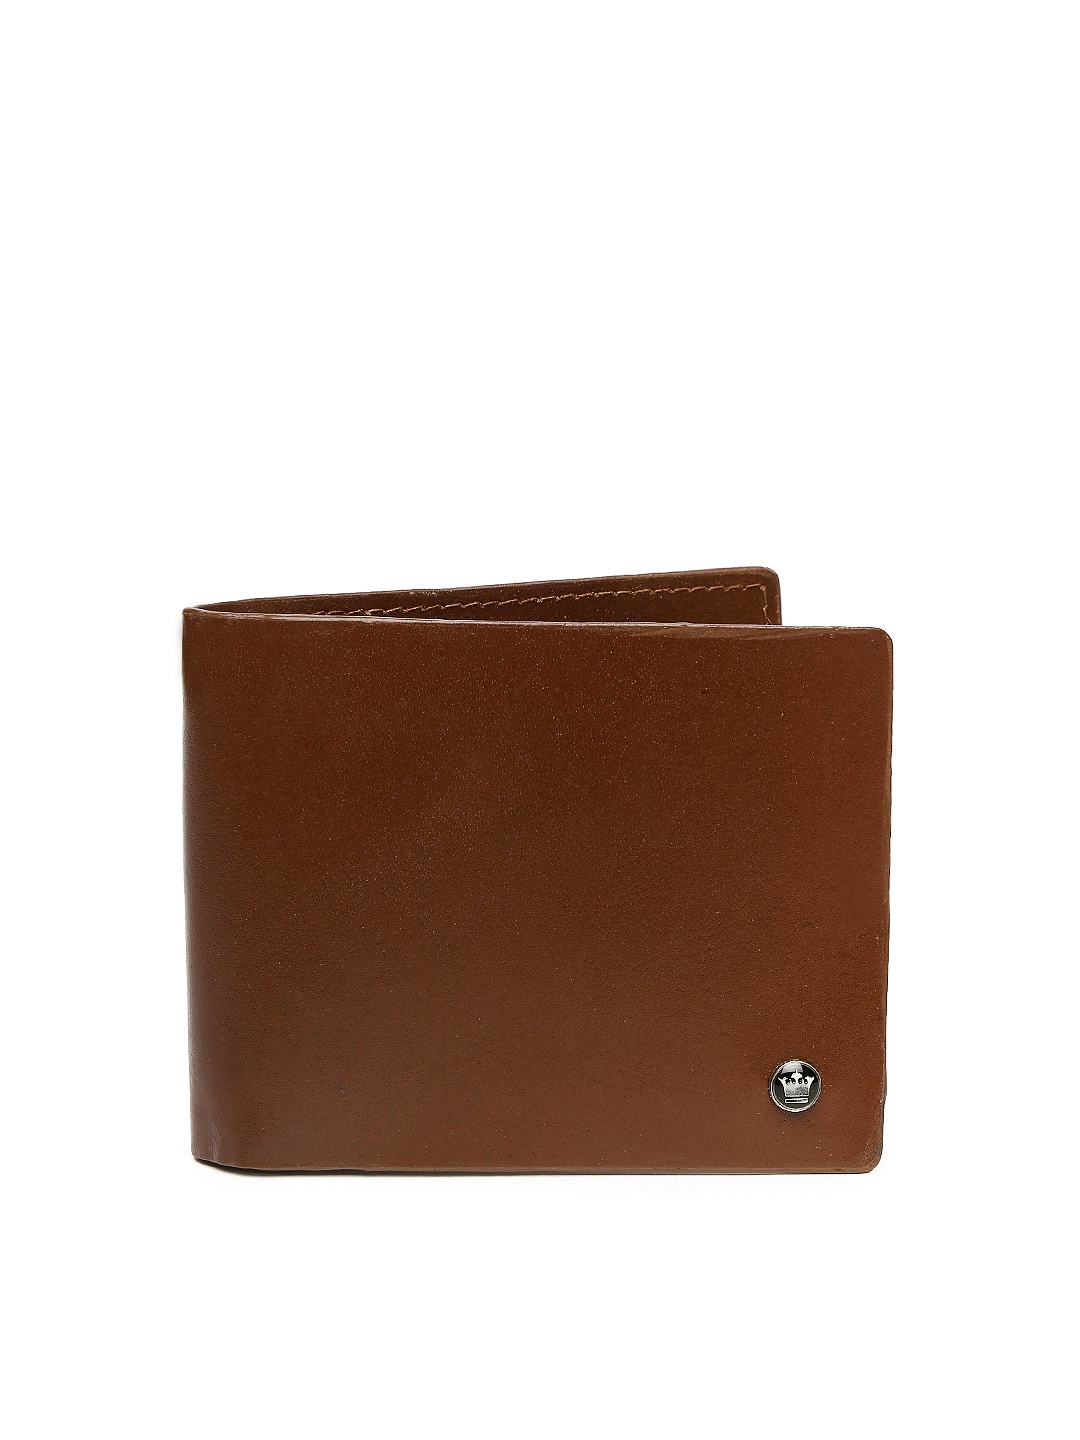 Louis Philippe Wallet Reviewed | Literacy Basics